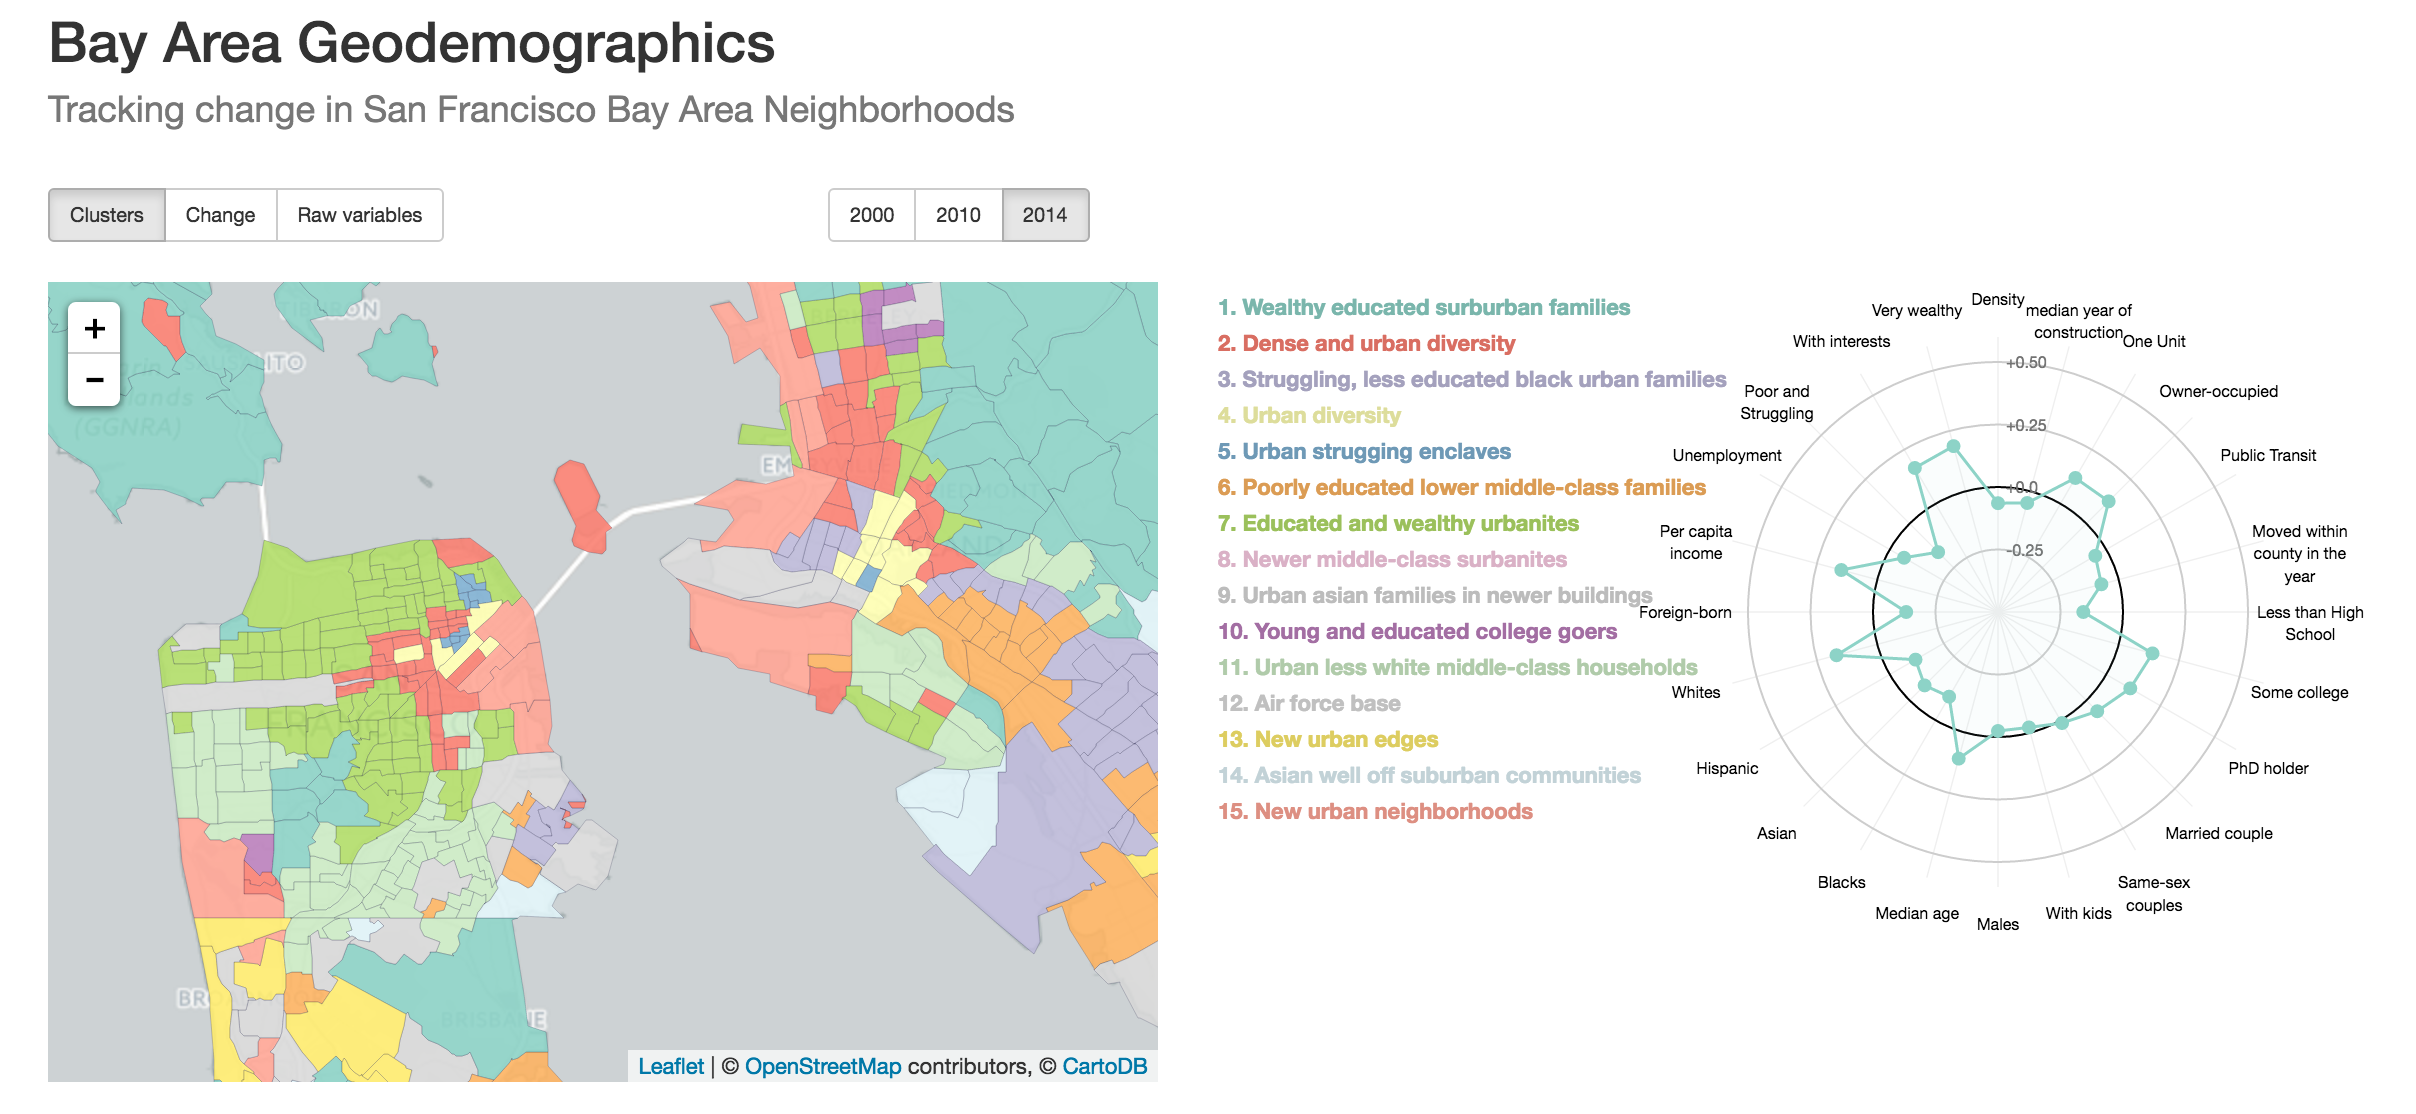 Map of a classification of neighborhoods in the Bay Area using hierarchical clustering based on a many variables like age, income, race, activities.